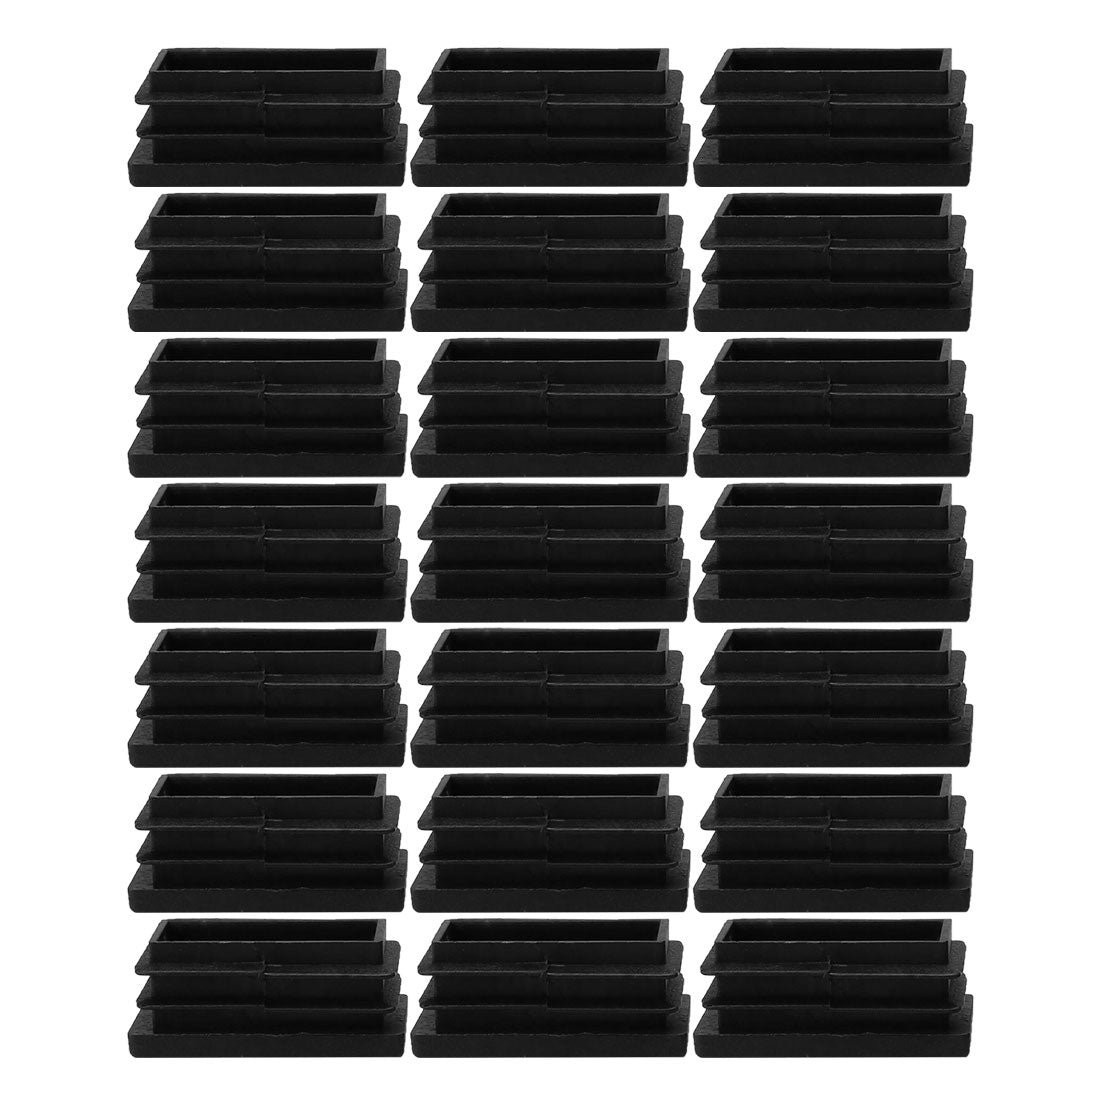 Uxcell Uxcell 21pcs 15 x 40mm Plastic Rectangle Ribbed Tube Inserts End Cover Cap Furniture Glide Chair Feet Floor Protector